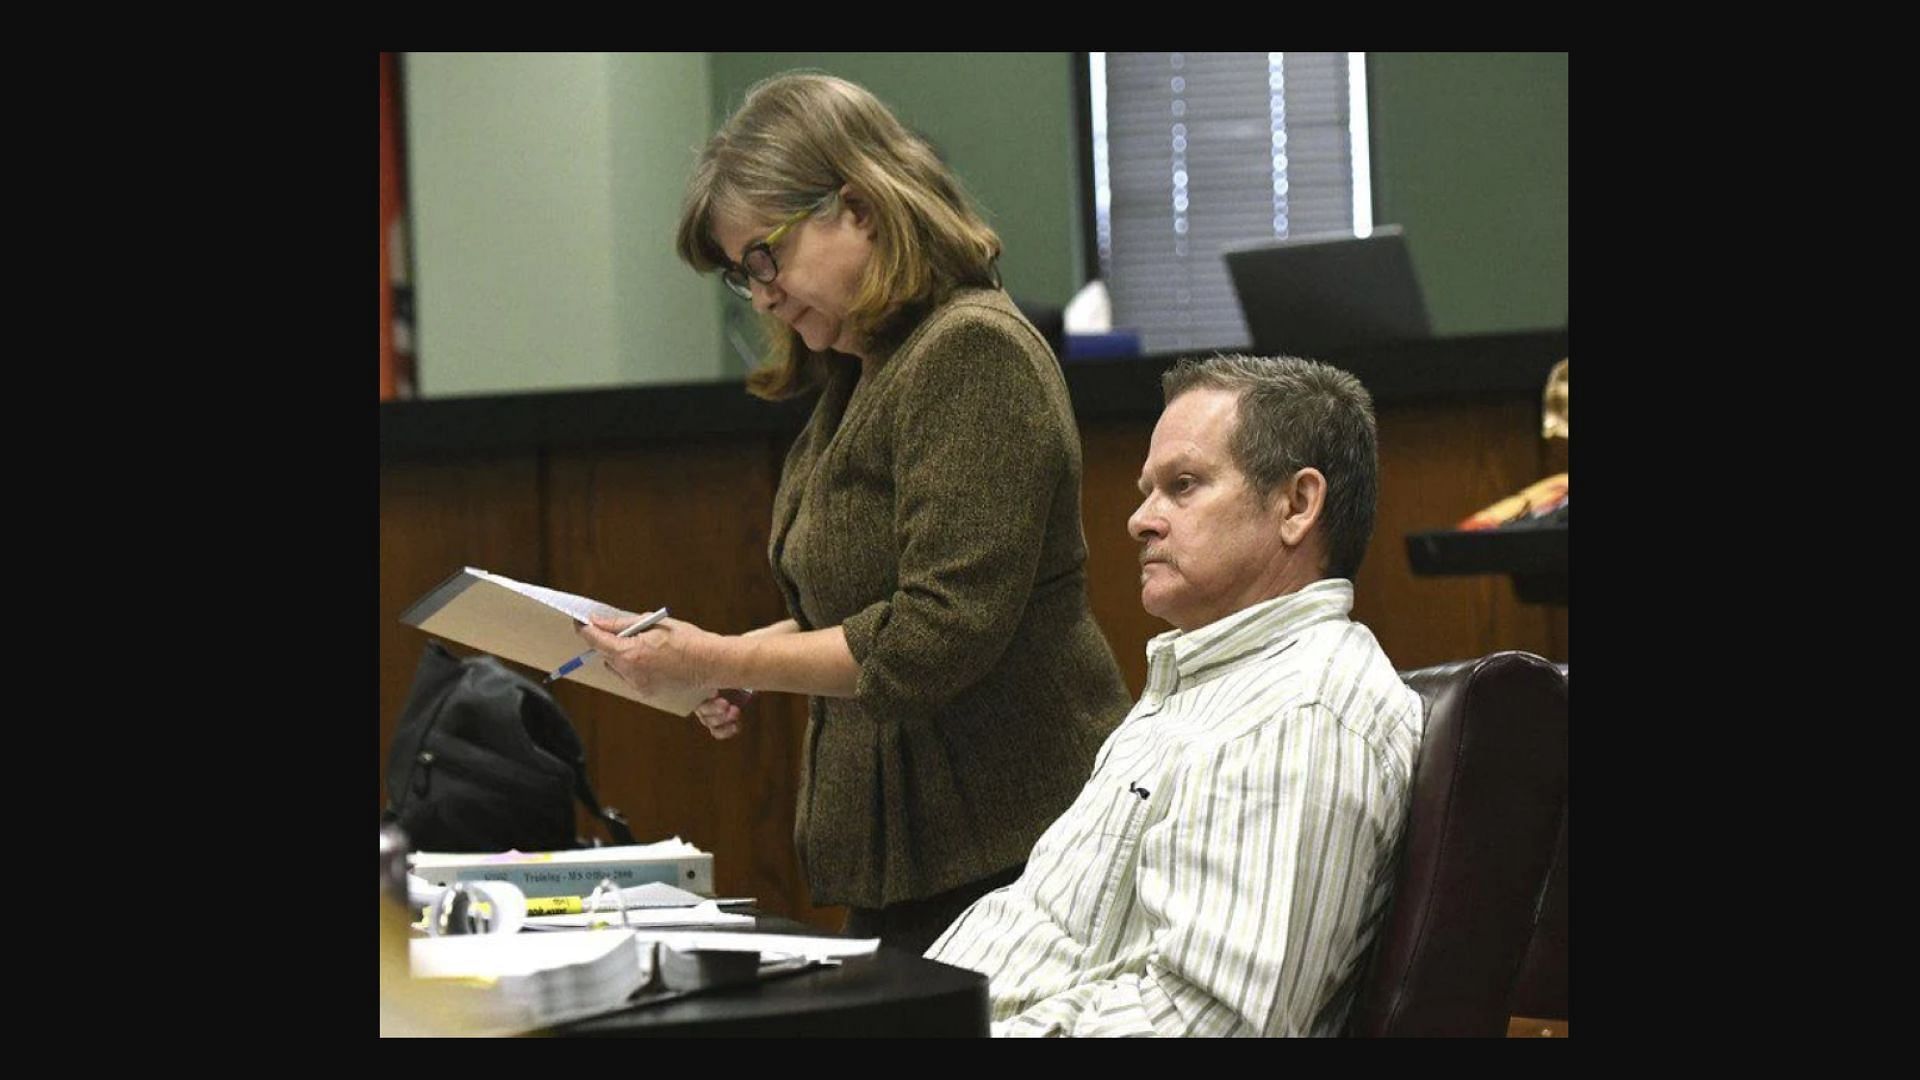 Todd Greathouse in the trial (Image via Laurie Sisk)